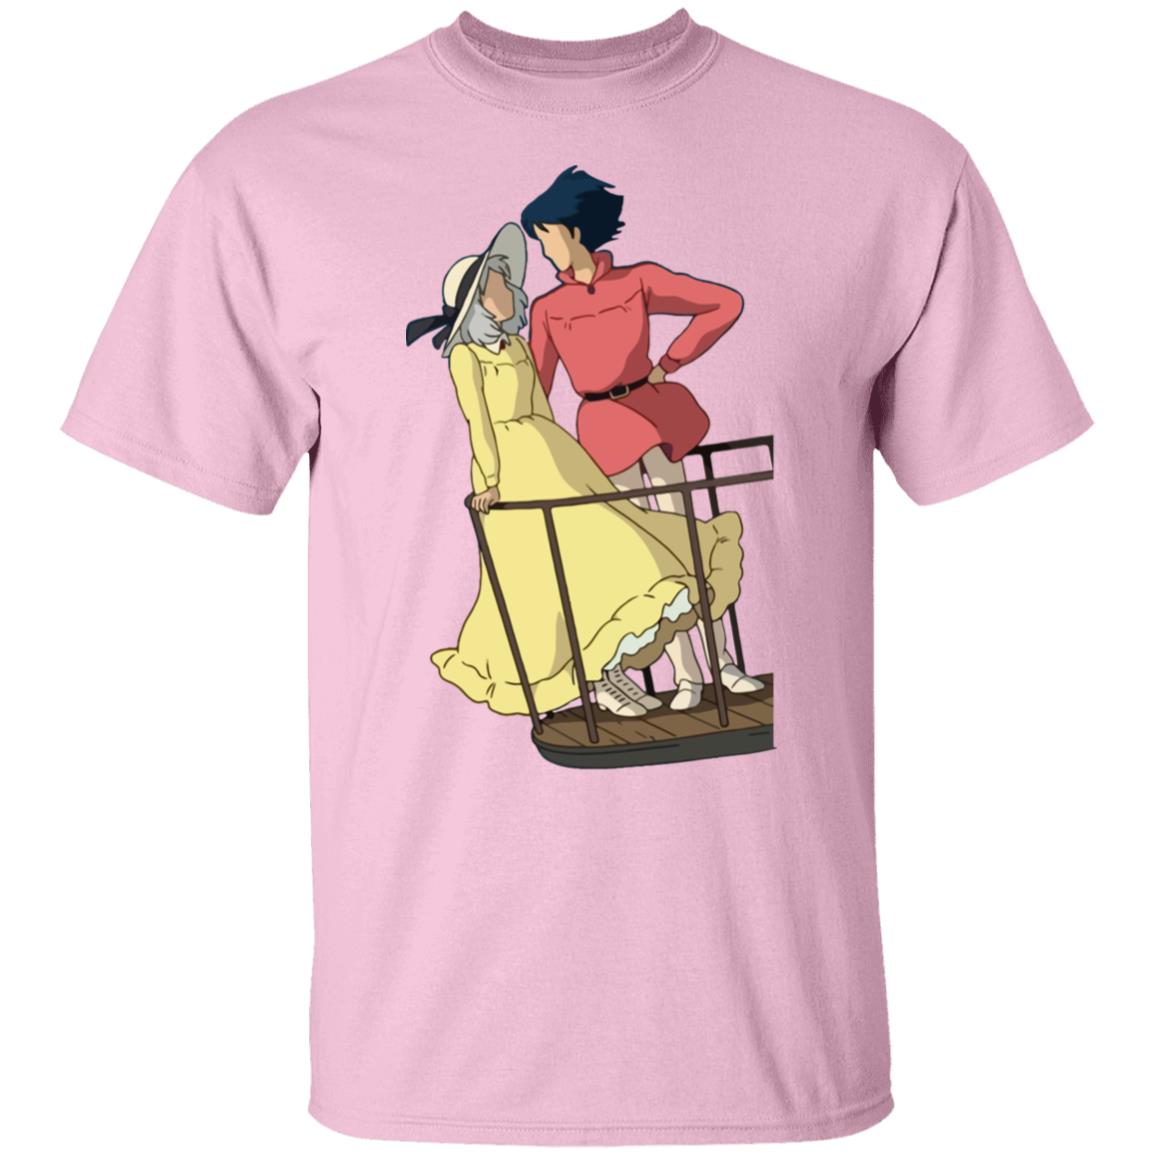 Howl’s Moving Castle – Sophie and Howl Gazing at Each other T Shirt